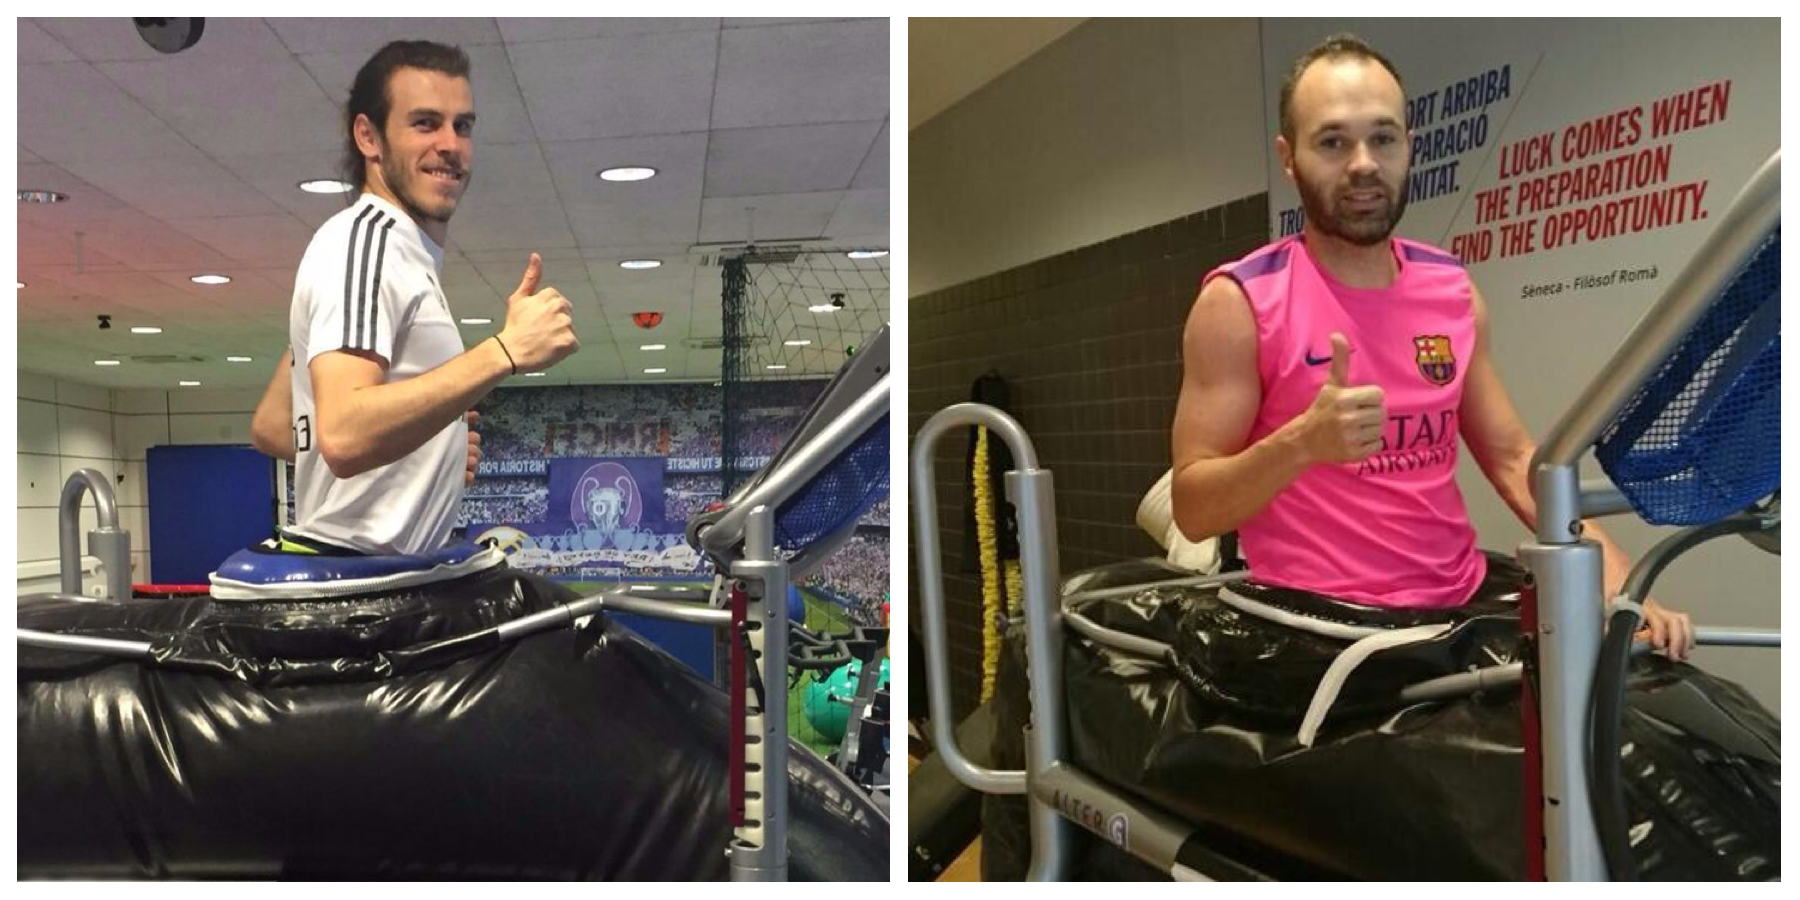 Gareth Bale and Andres Iniesta using Alter-G machines